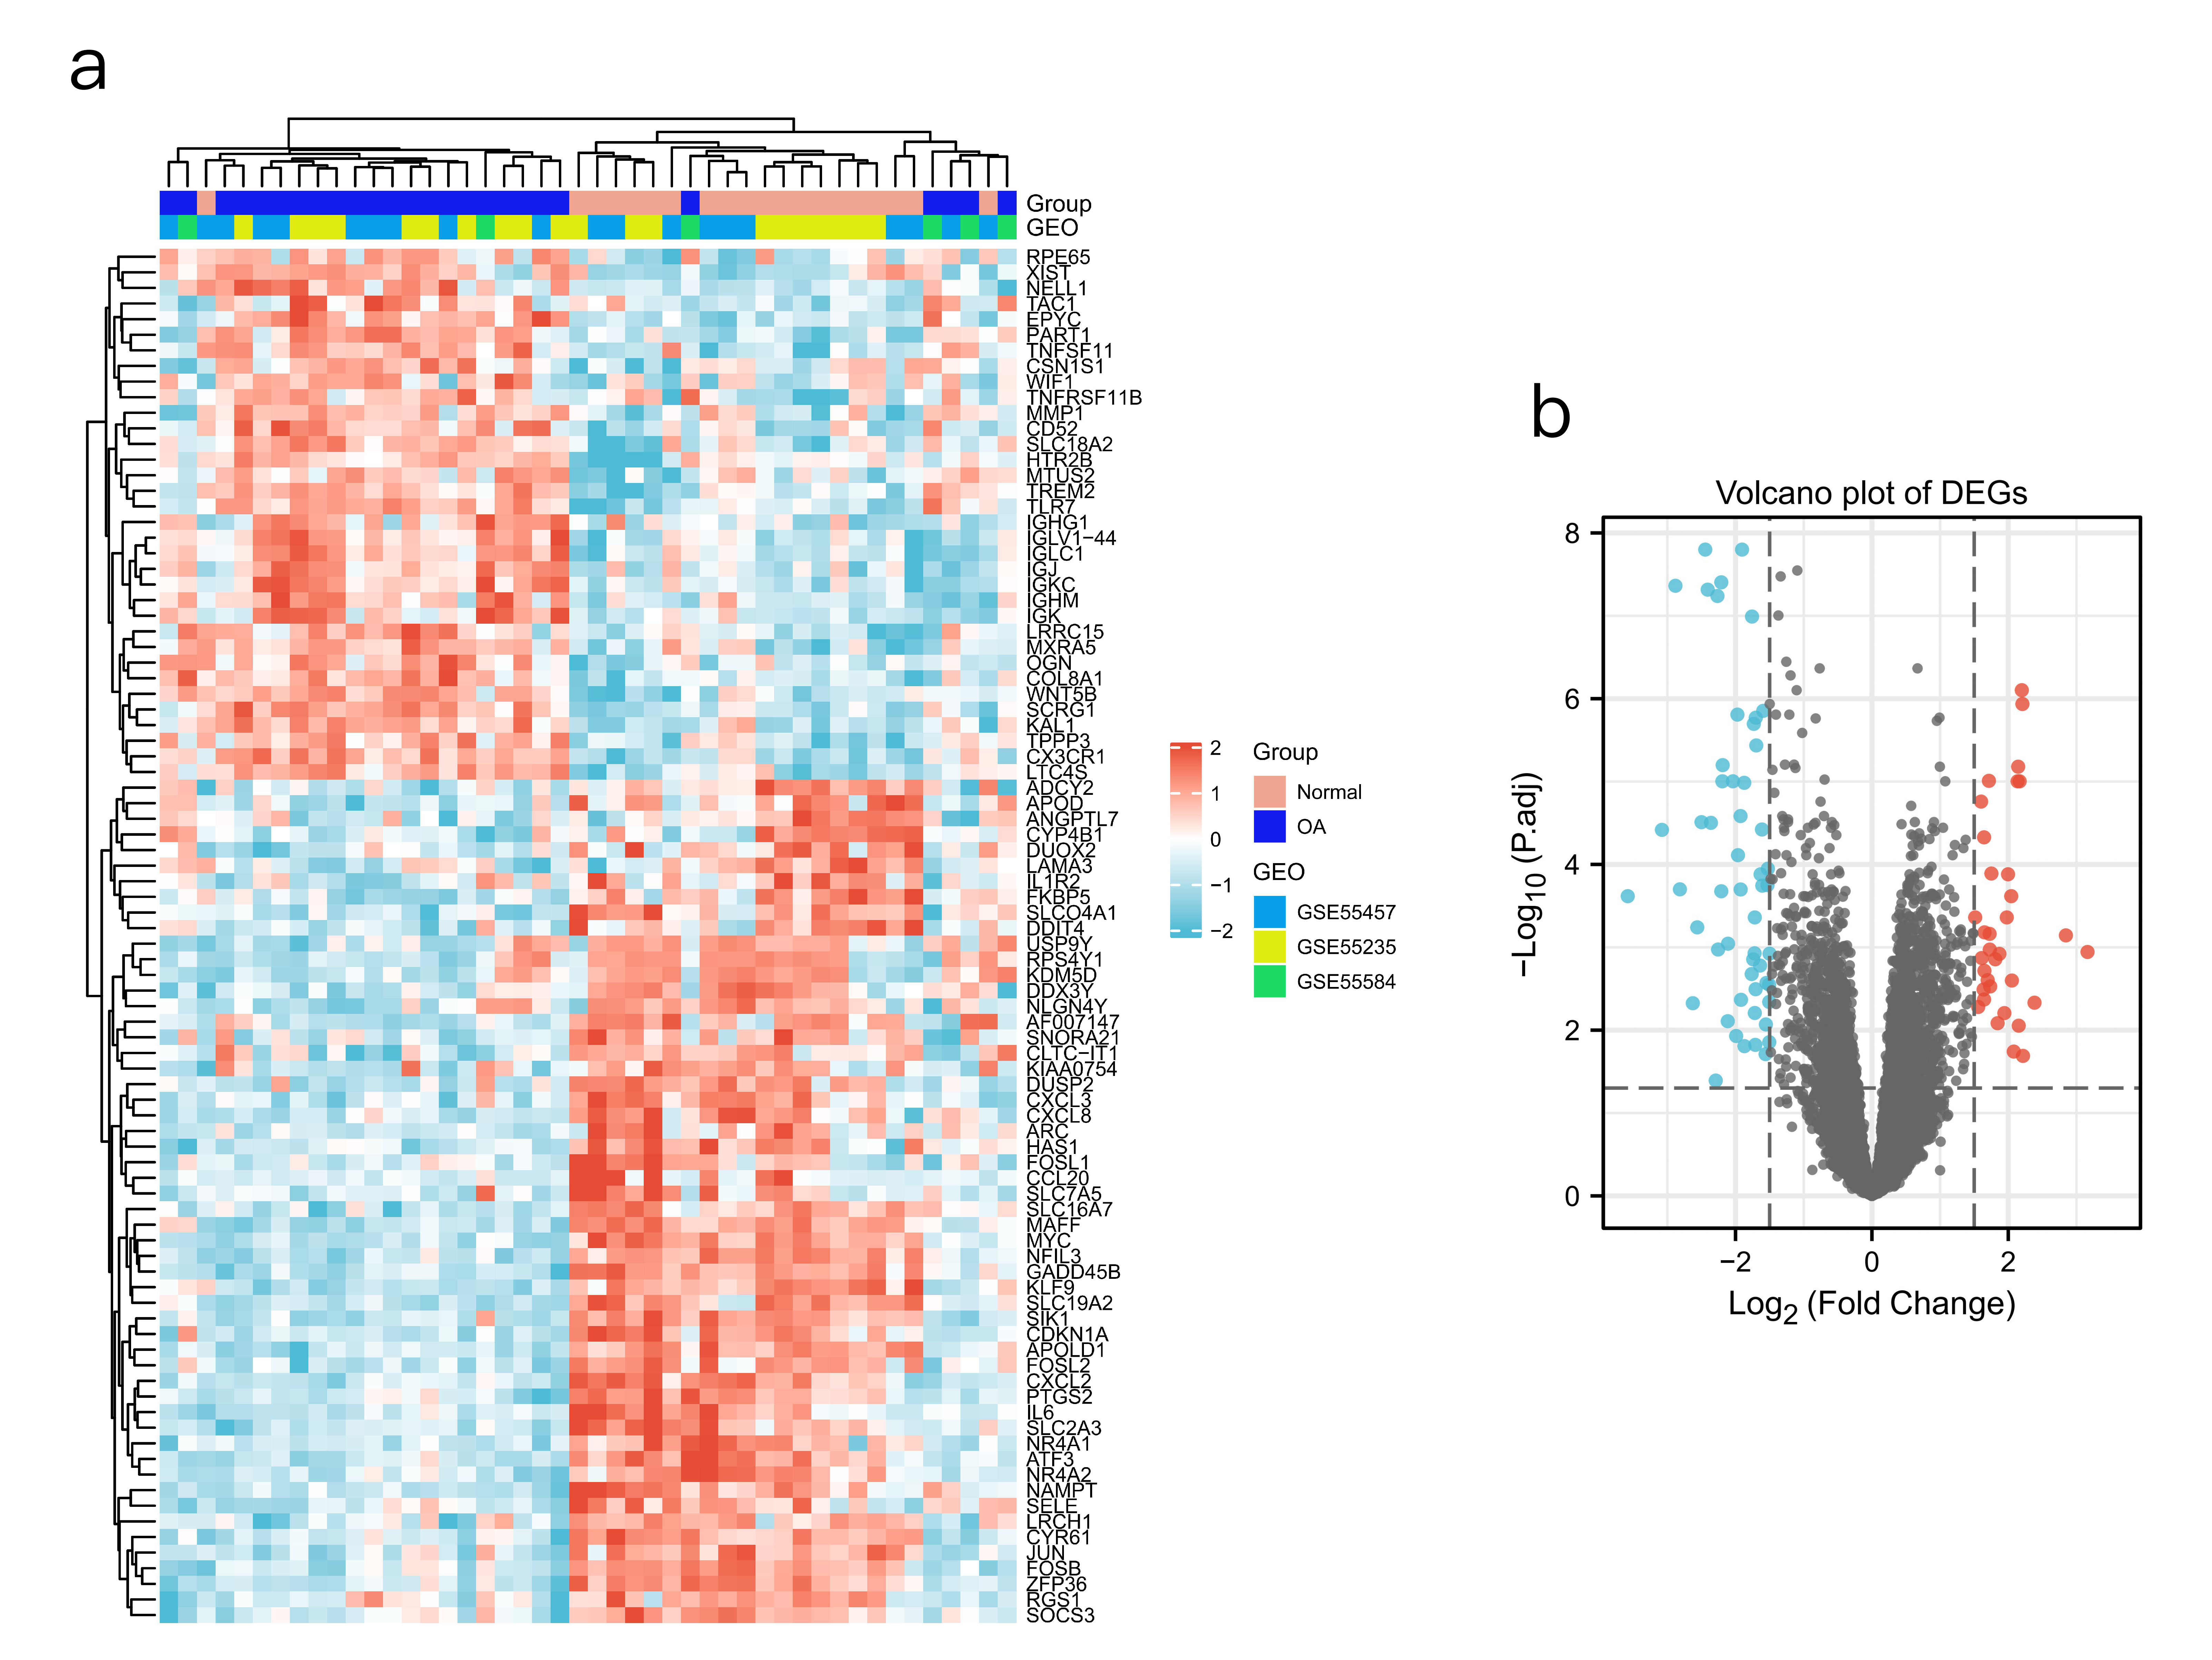 Fig. 1 
            Differentially expressed genes (DEGs) of synovial tissue between osteoarthritis (OA) and normal controls. a) Heatmap of DEGs. Red rectangles represent high expression, and blue rectangles represent low expression. b) Volcano plot of DEGs. Red spots represent upregulated genes, and blue spots represent downregulated genes.
          